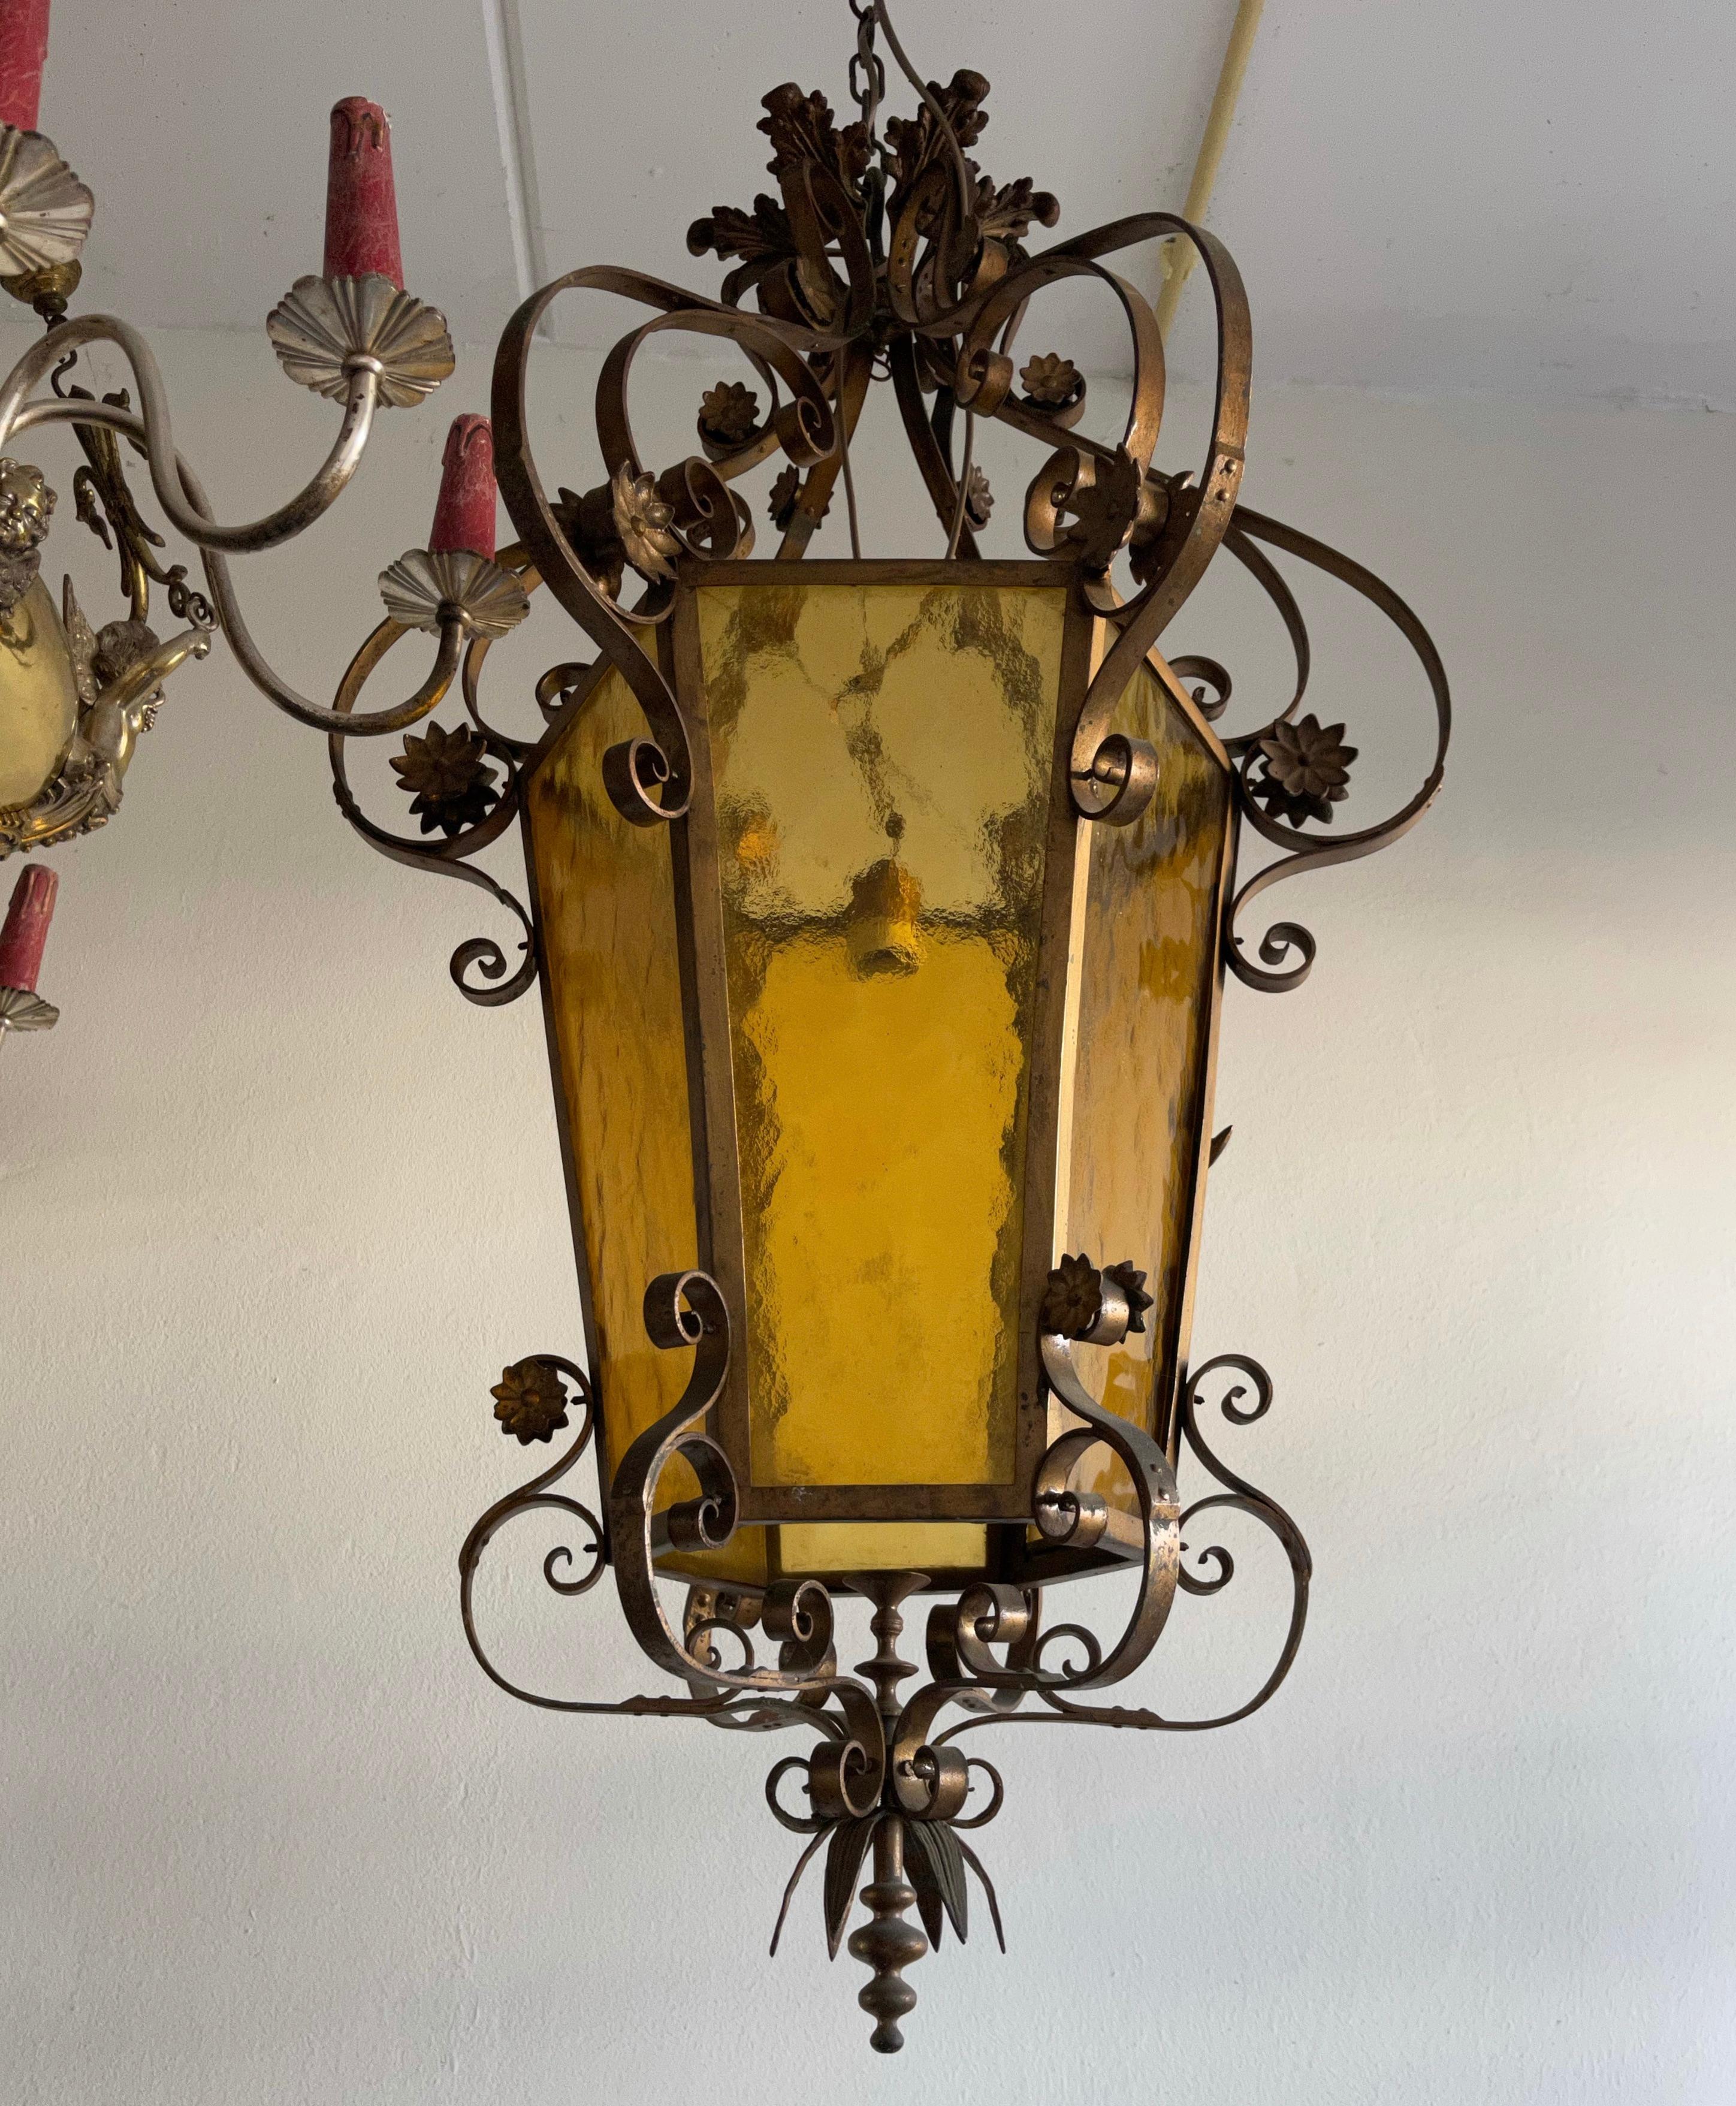 Top quality and large size, handcrafted light fixture.

With early 20th century lighting as one of our specialties, we are always happy to find a pendant, lantern or chandelier that we have never seen before. This large and brass lantern is another